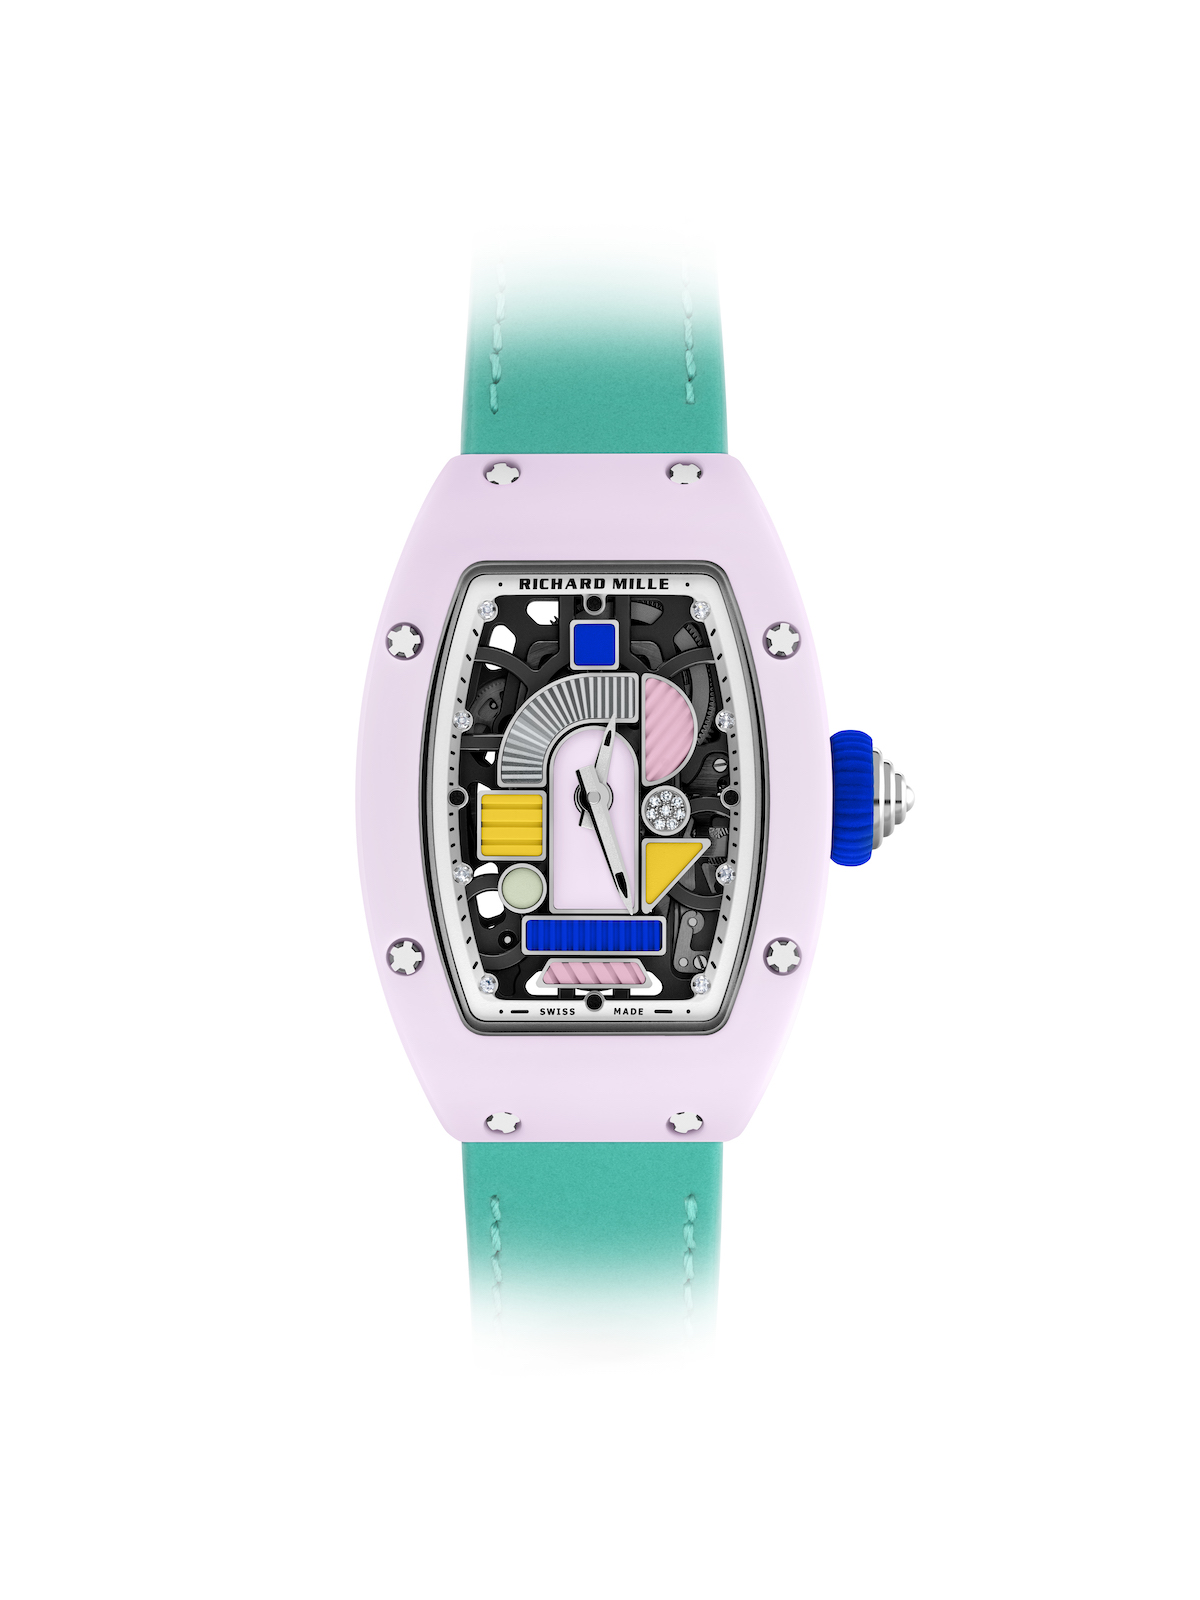 Richard MIlle RM 07-01 Colored Ceramic Capsule collection: Endless Summer. 